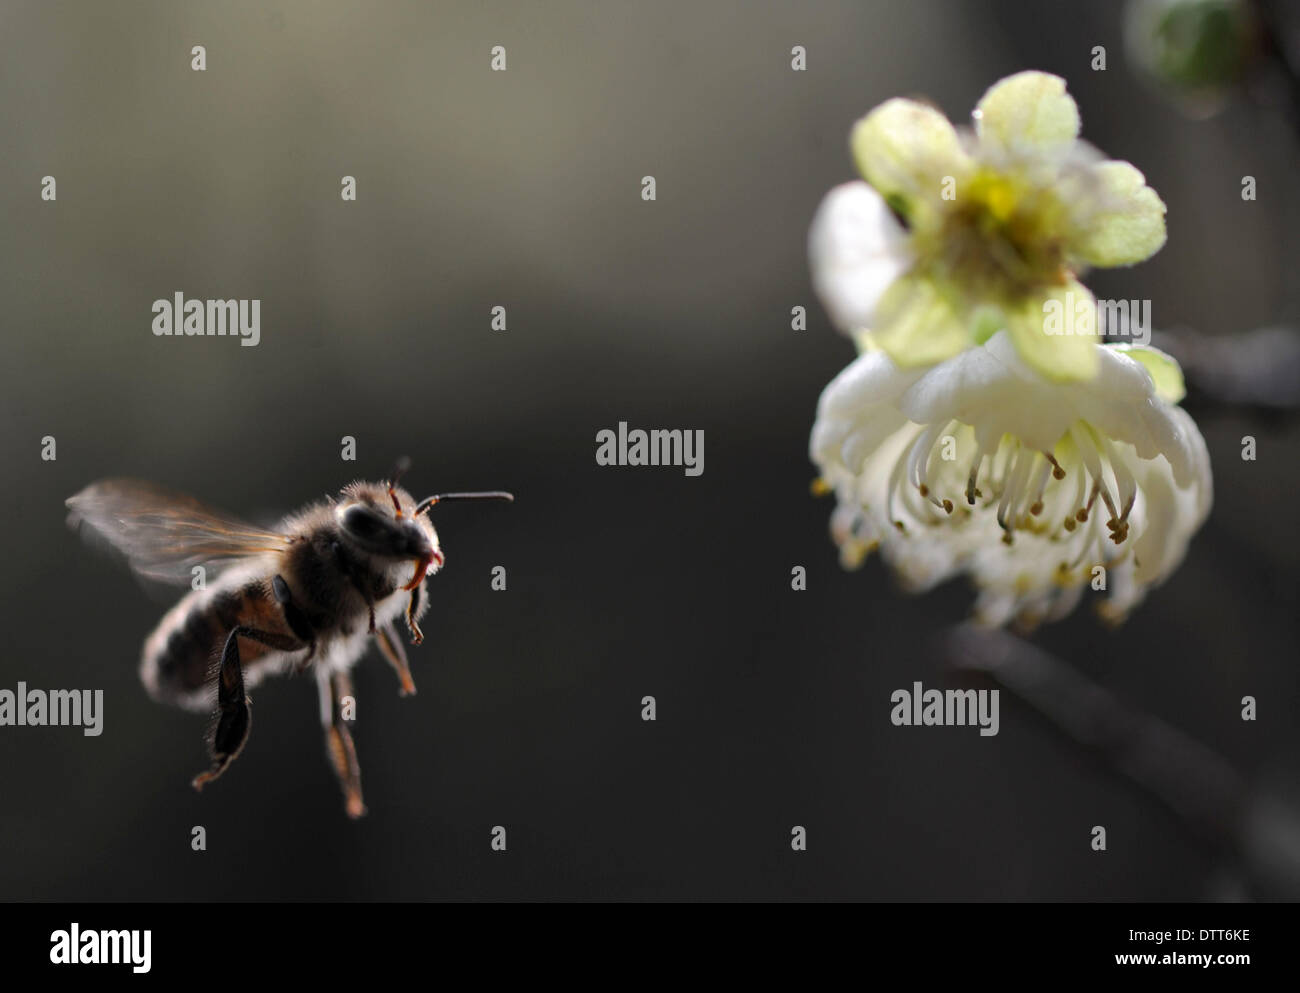 Chengdu. 1st Feb, 2014. The file photo taken on Feb. 1, 2014 shows a bee collecting honey among plum flowers in Chengdu, capital of southwest China's Sichuan Province. The Chengdu Plain is a primary base for China's apiculture industry. Now this industry is in a bloom thanks to the warm winter in 2013. © Xiong Xiaoli/Xinhua/Alamy Live News Stock Photo